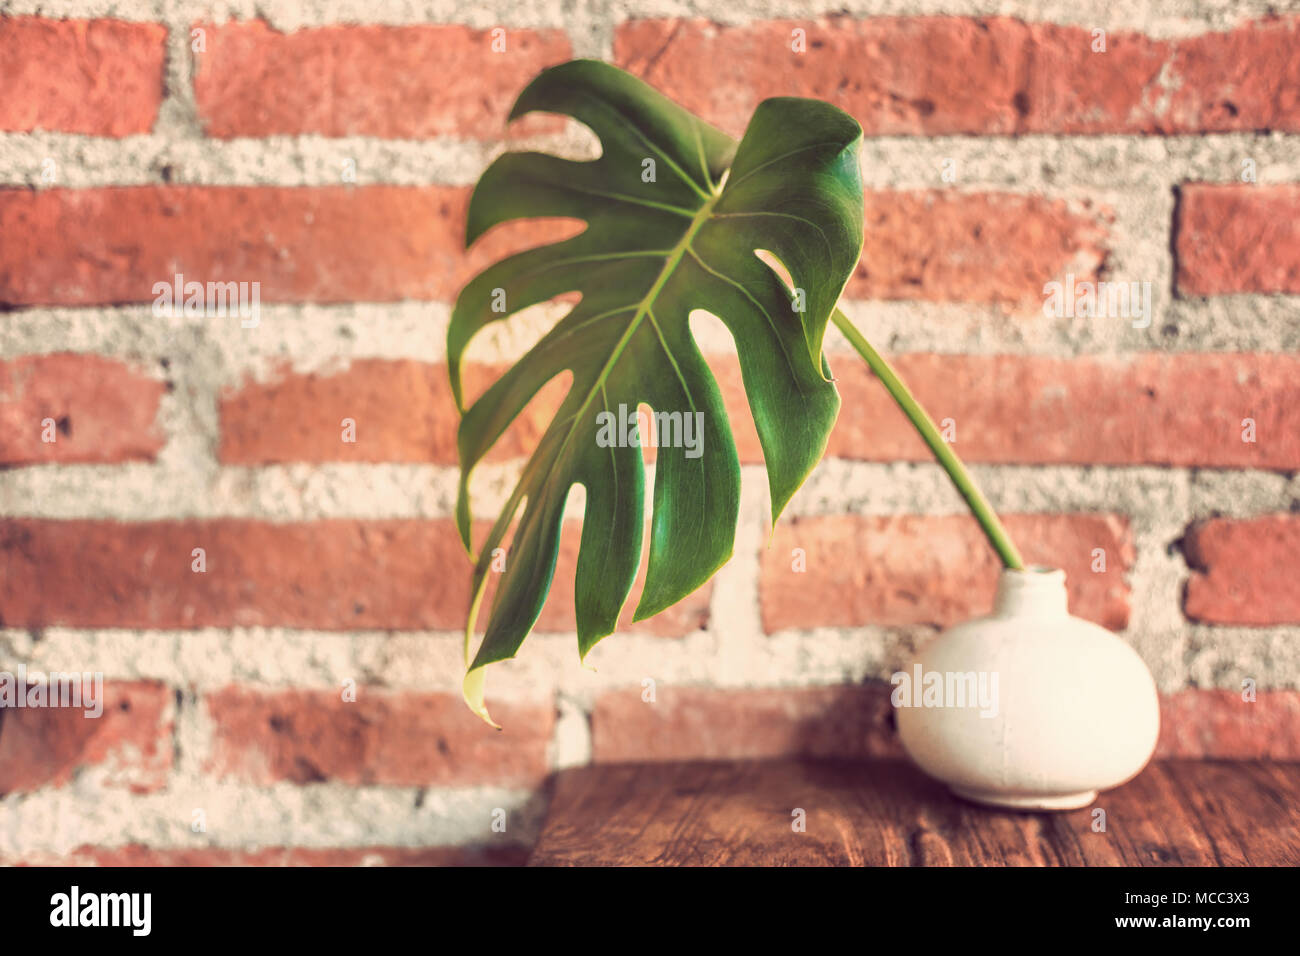 Big green leaf in a small white vase sitting on wood table against rough brick wall, vintage retro color tone, good backgroud for earth tone theme Stock Photo